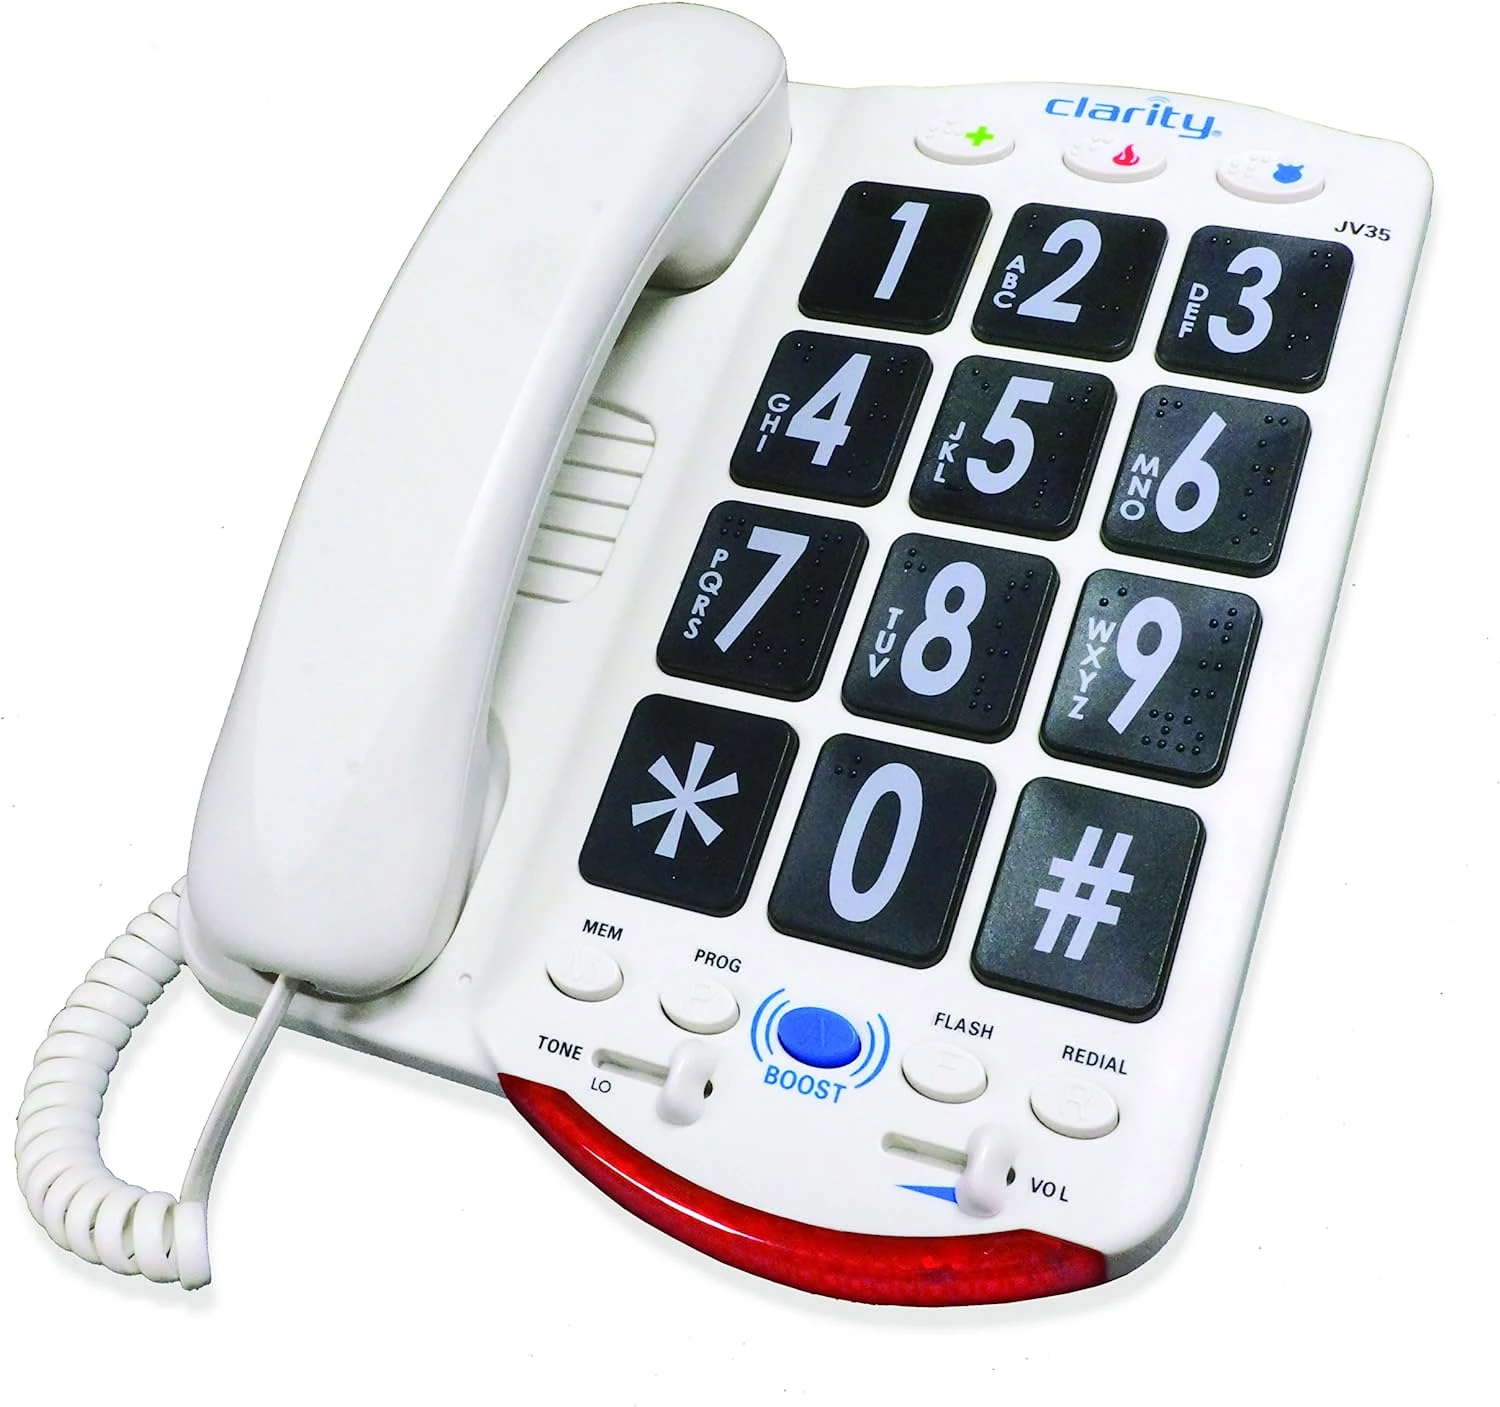 Clarity JV-35 Amplified Big Button Phone with Talk Back Numbers